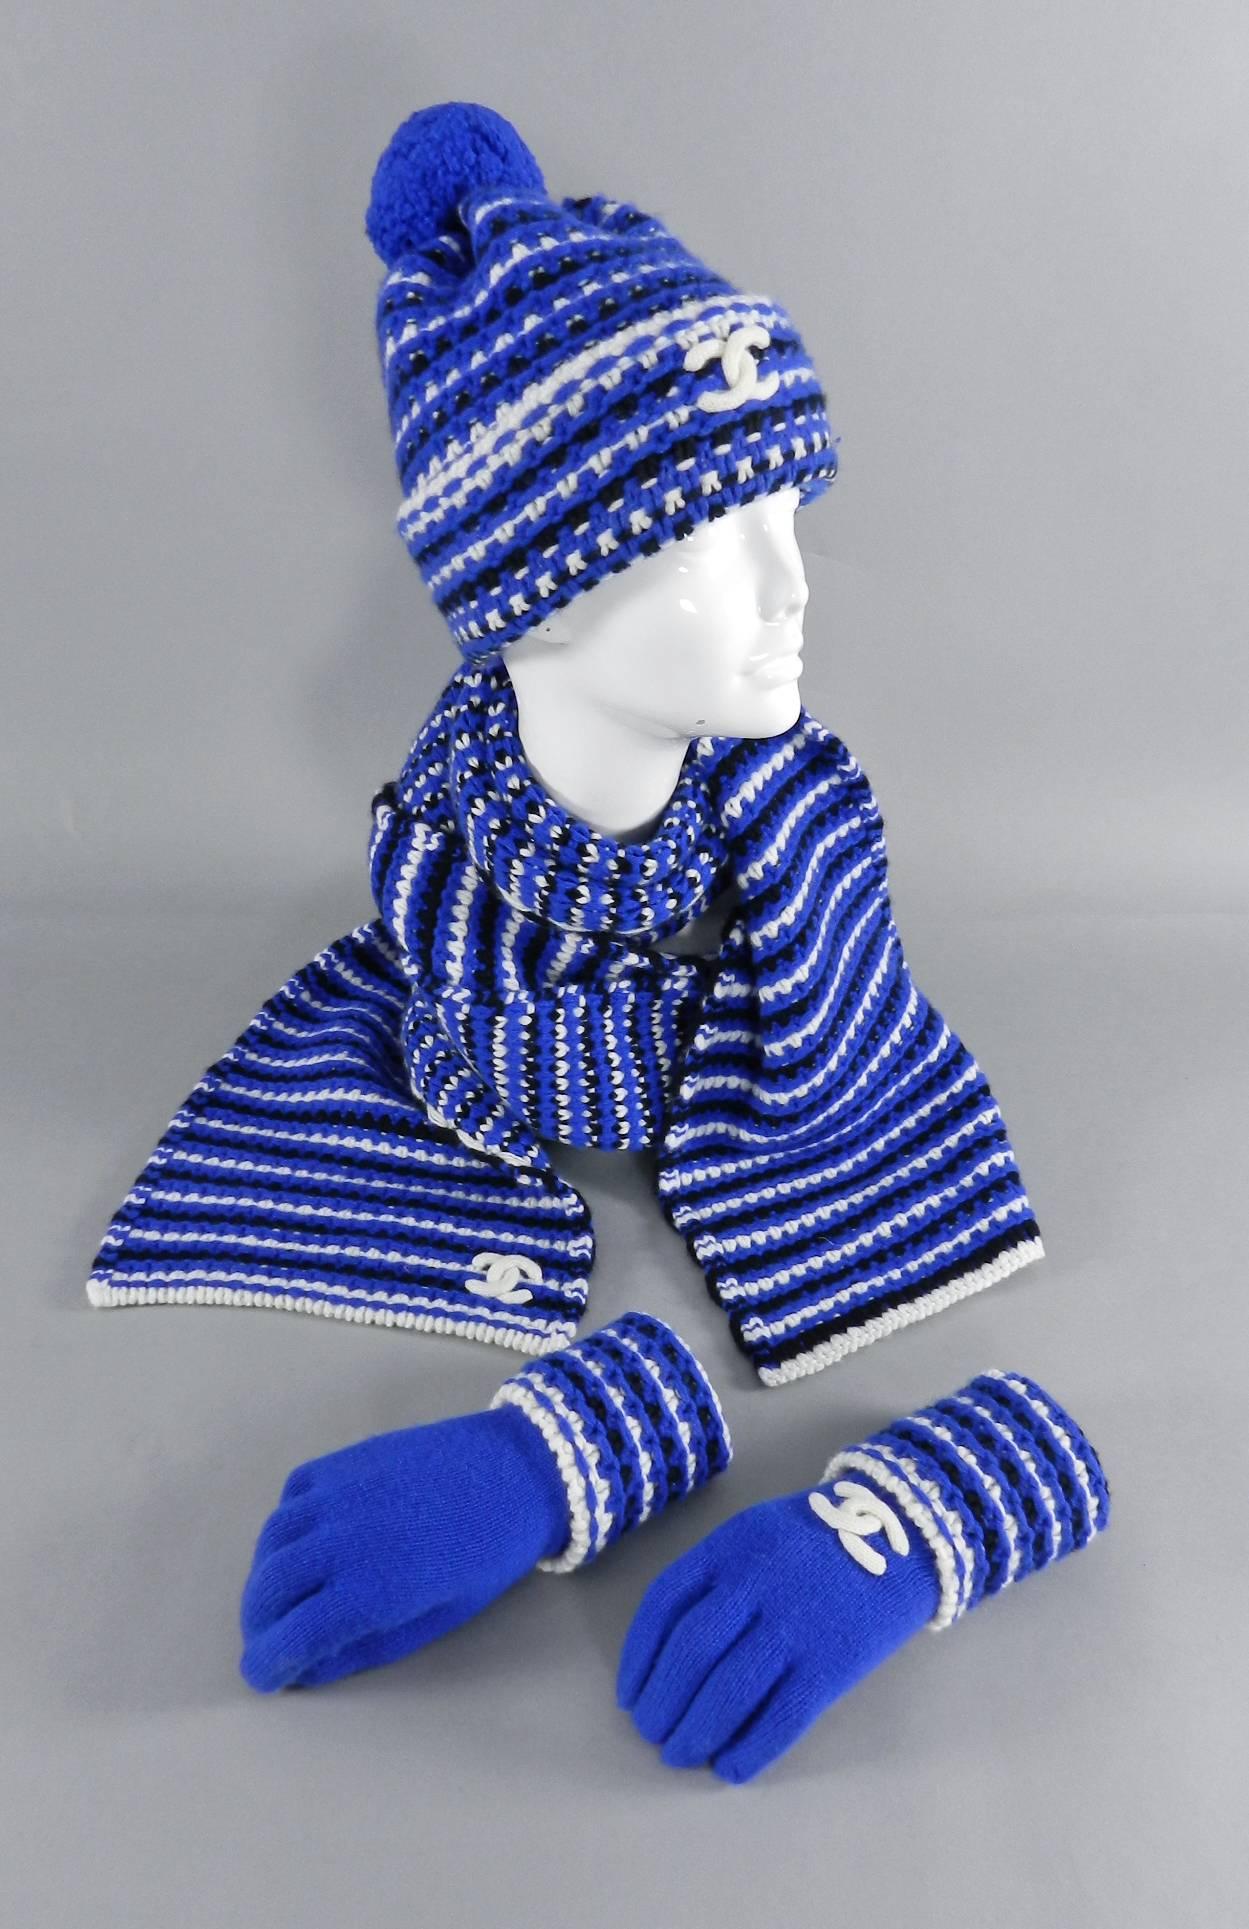 Women's Chanel Fall 2014 Supermarket Blue and White Cashmere Knit Scarf Hat Gloves Set